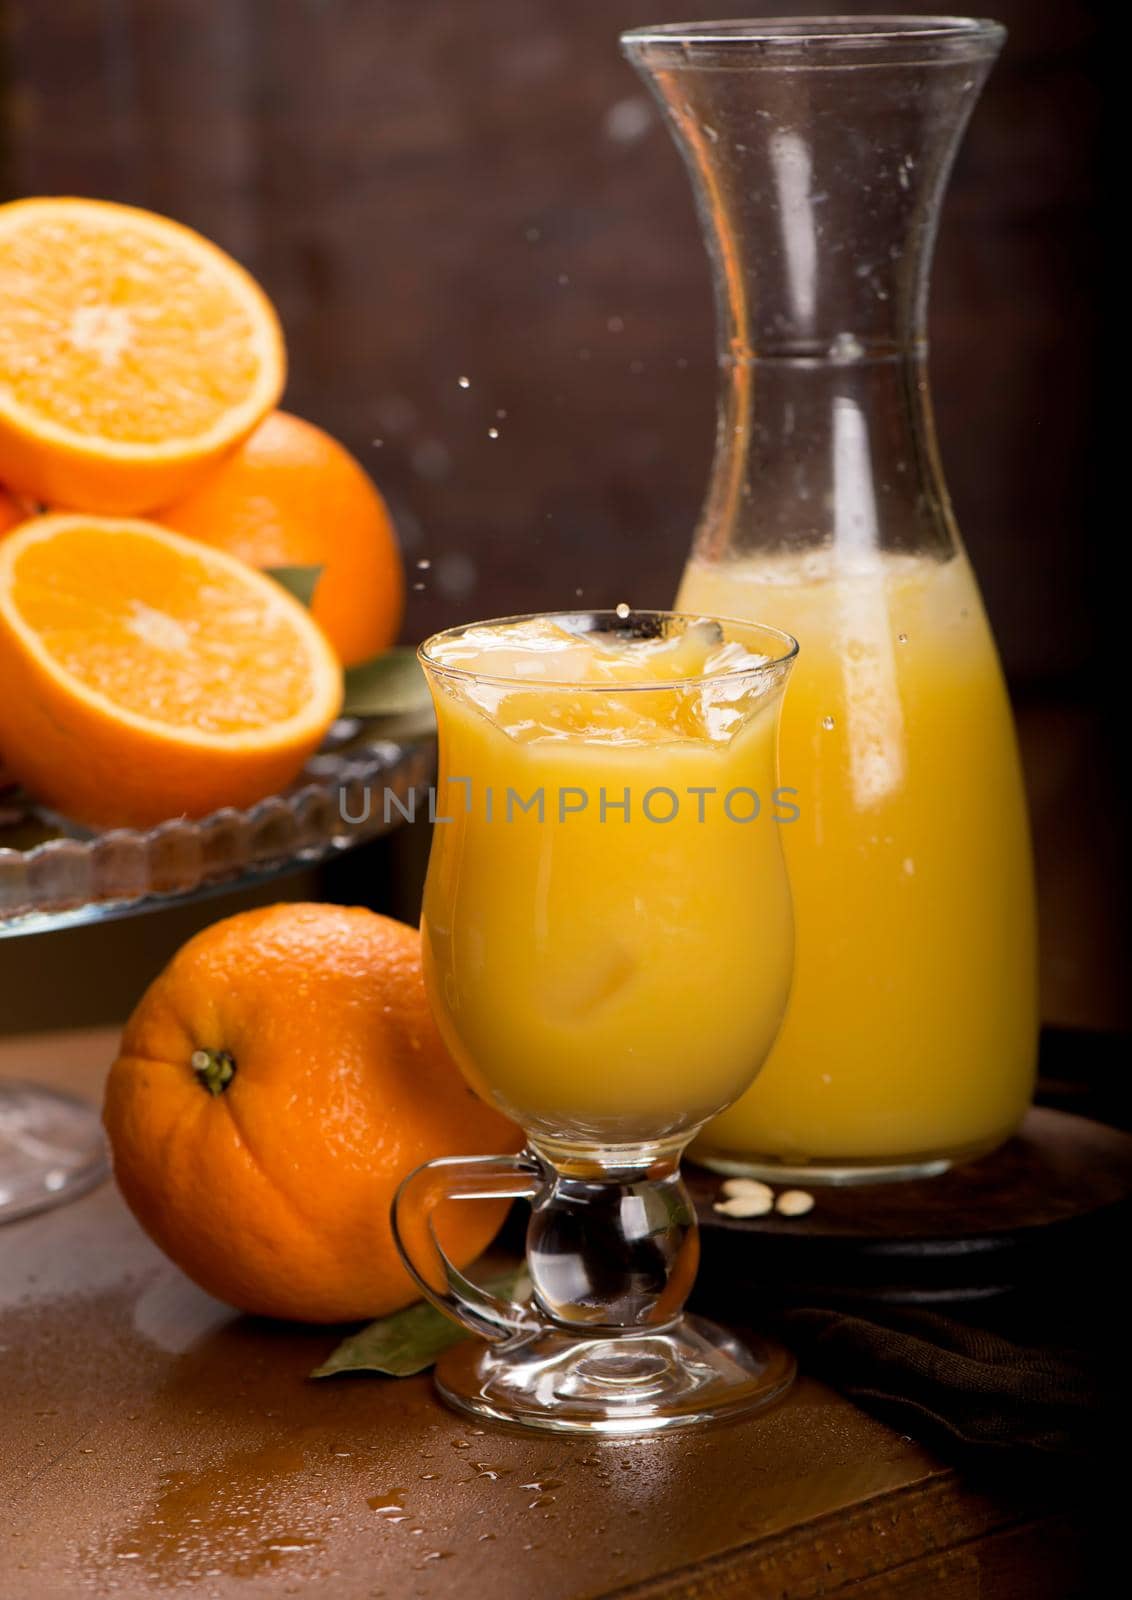 glass of fresh orange juice with fresh fruits on wooden table